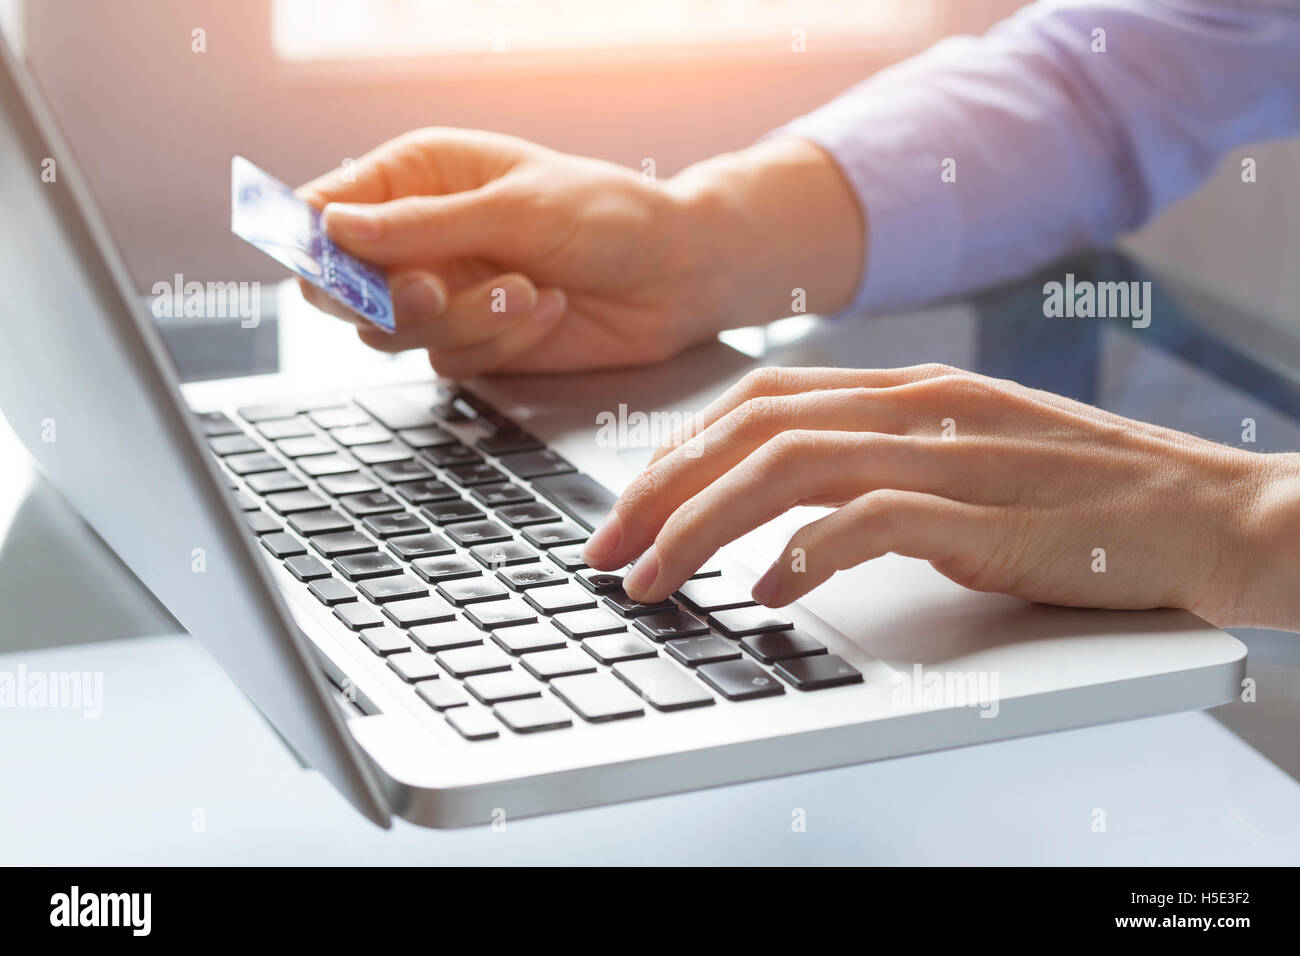 Concept about online payment on internet and e-commerce, woman at home typing credit card number on computer Stock Photo